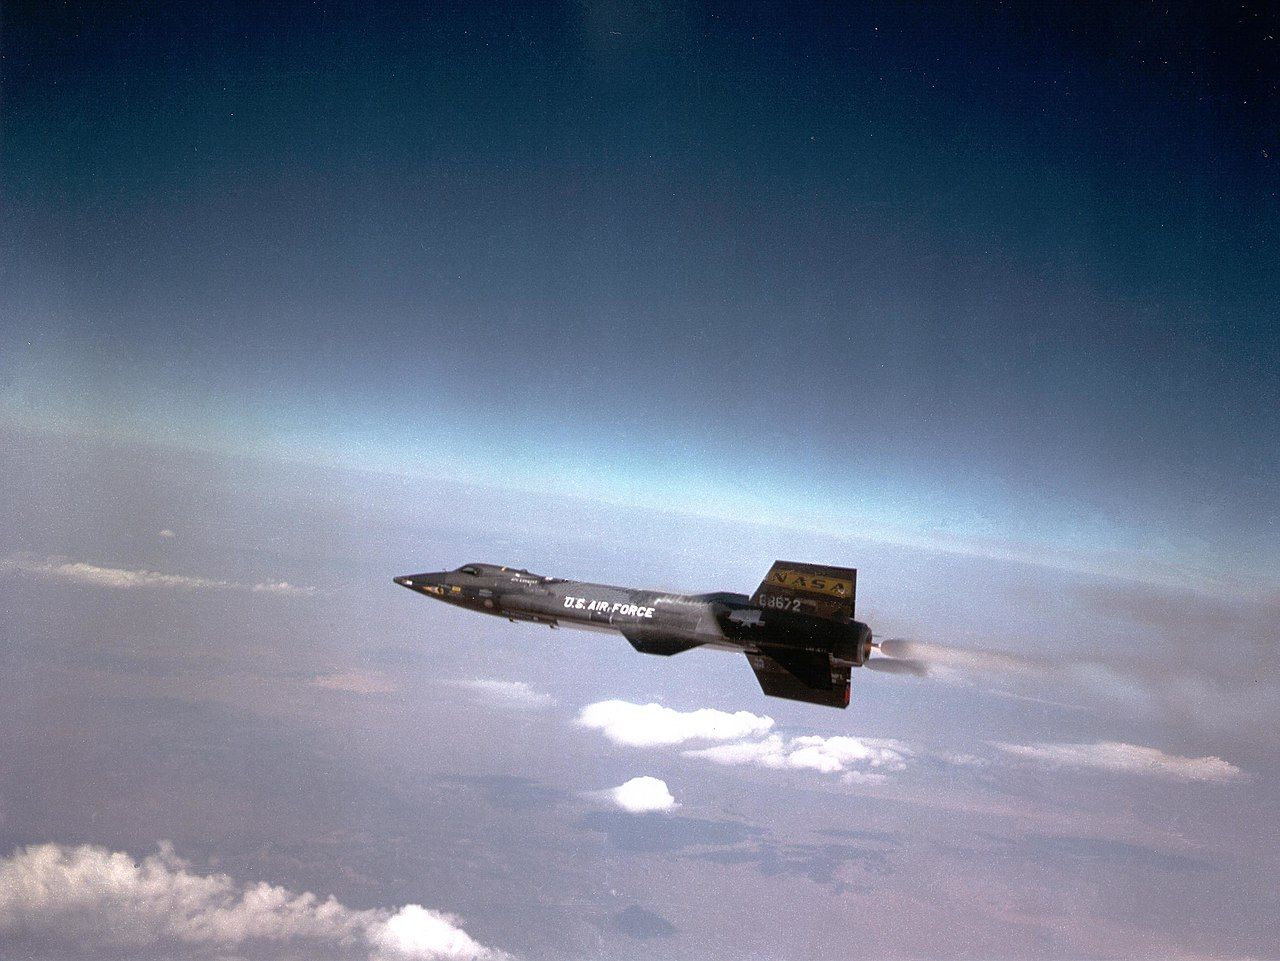 A North American X-15 flying high above the clouds.